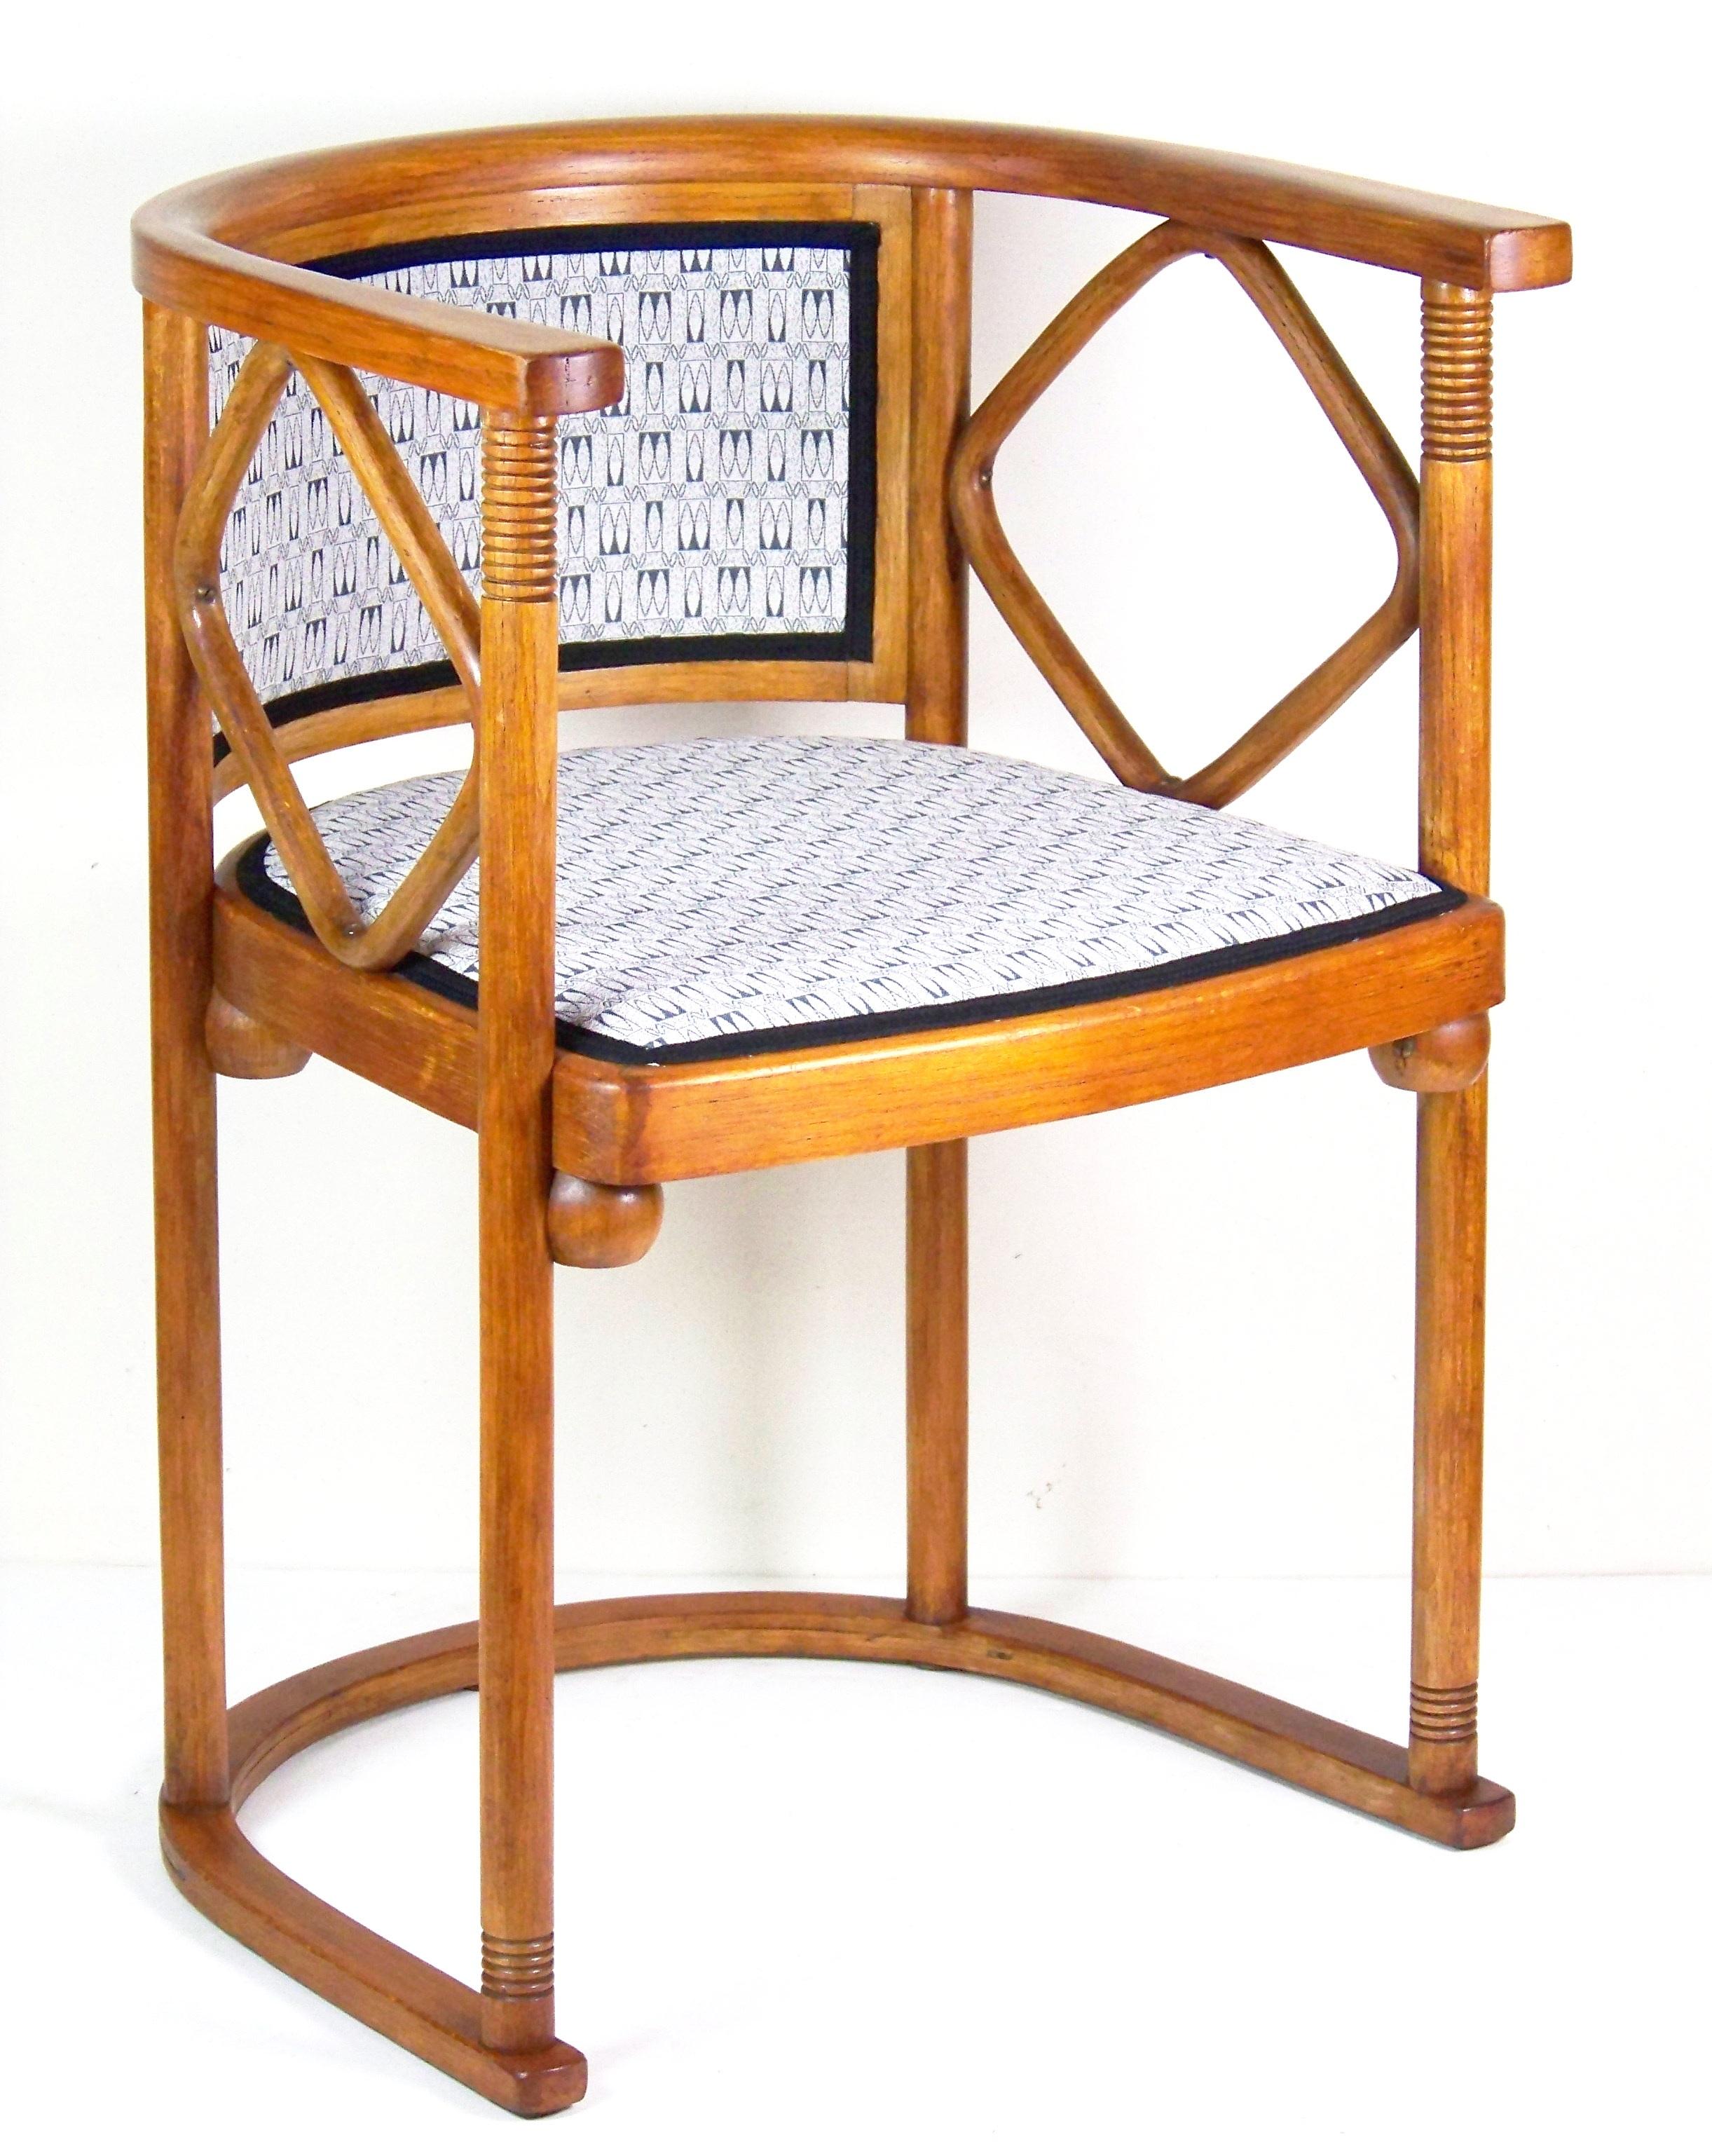 New upholstery, with woven decor inspired by work of Josef Hoffmann. The wooden bases were perfectly cleaned and treated with impregnating oil. Armchair by Josef Hoffmann for Cabaret Fledermaus in Vienna.

